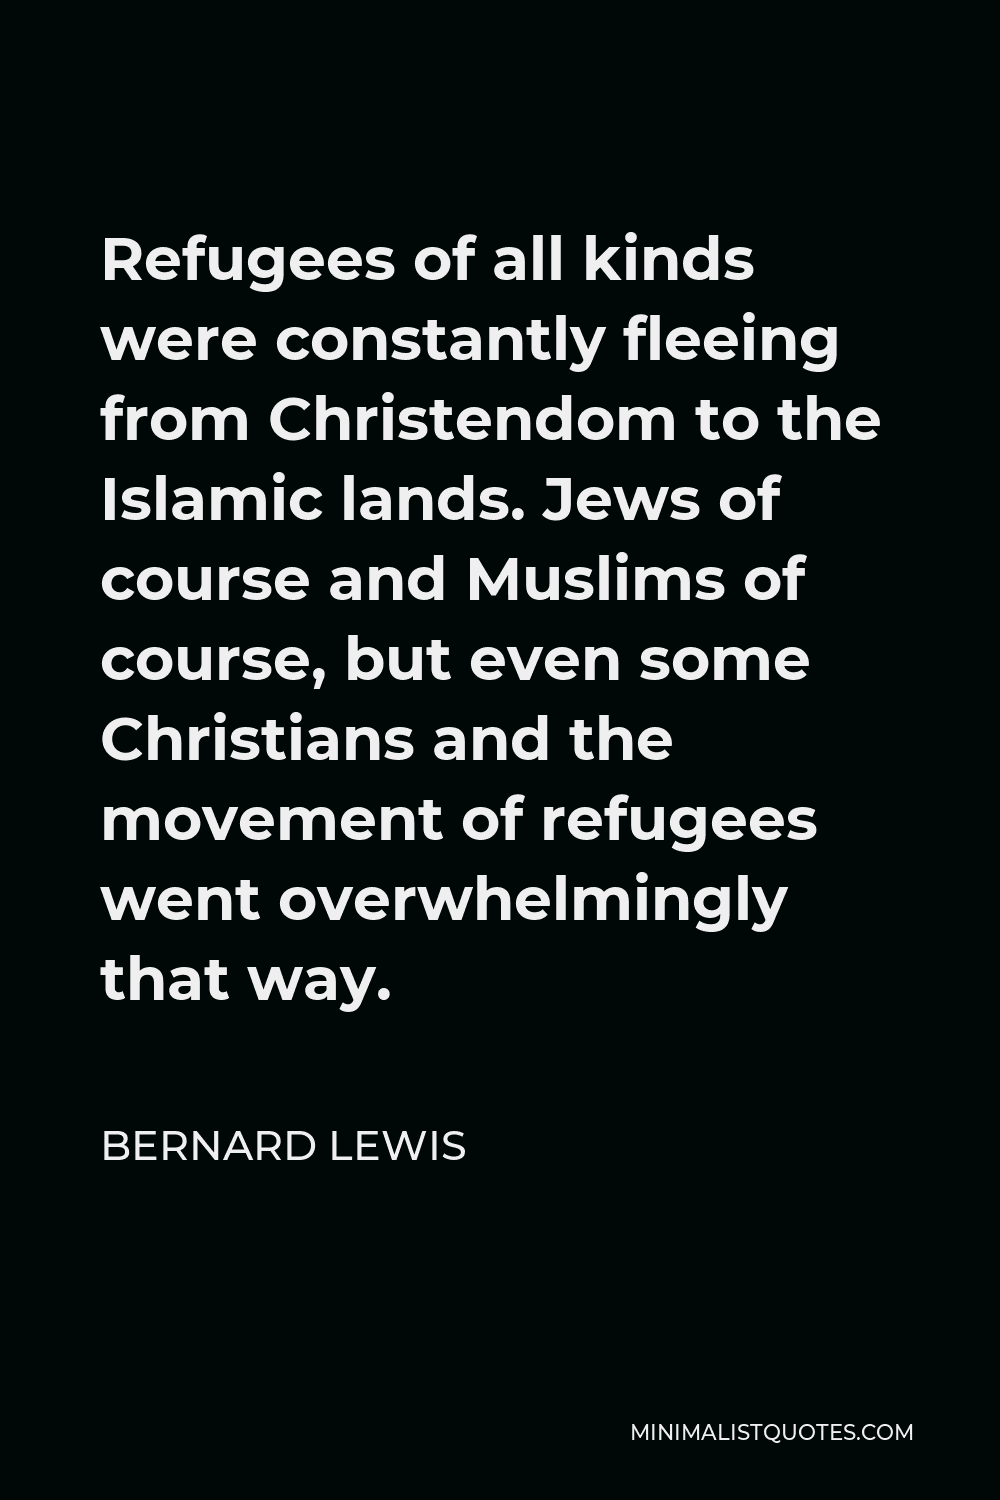 Bernard Lewis Quote - Refugees of all kinds were constantly fleeing from Christendom to the Islamic lands. Jews of course and Muslims of course, but even some Christians and the movement of refugees went overwhelmingly that way.